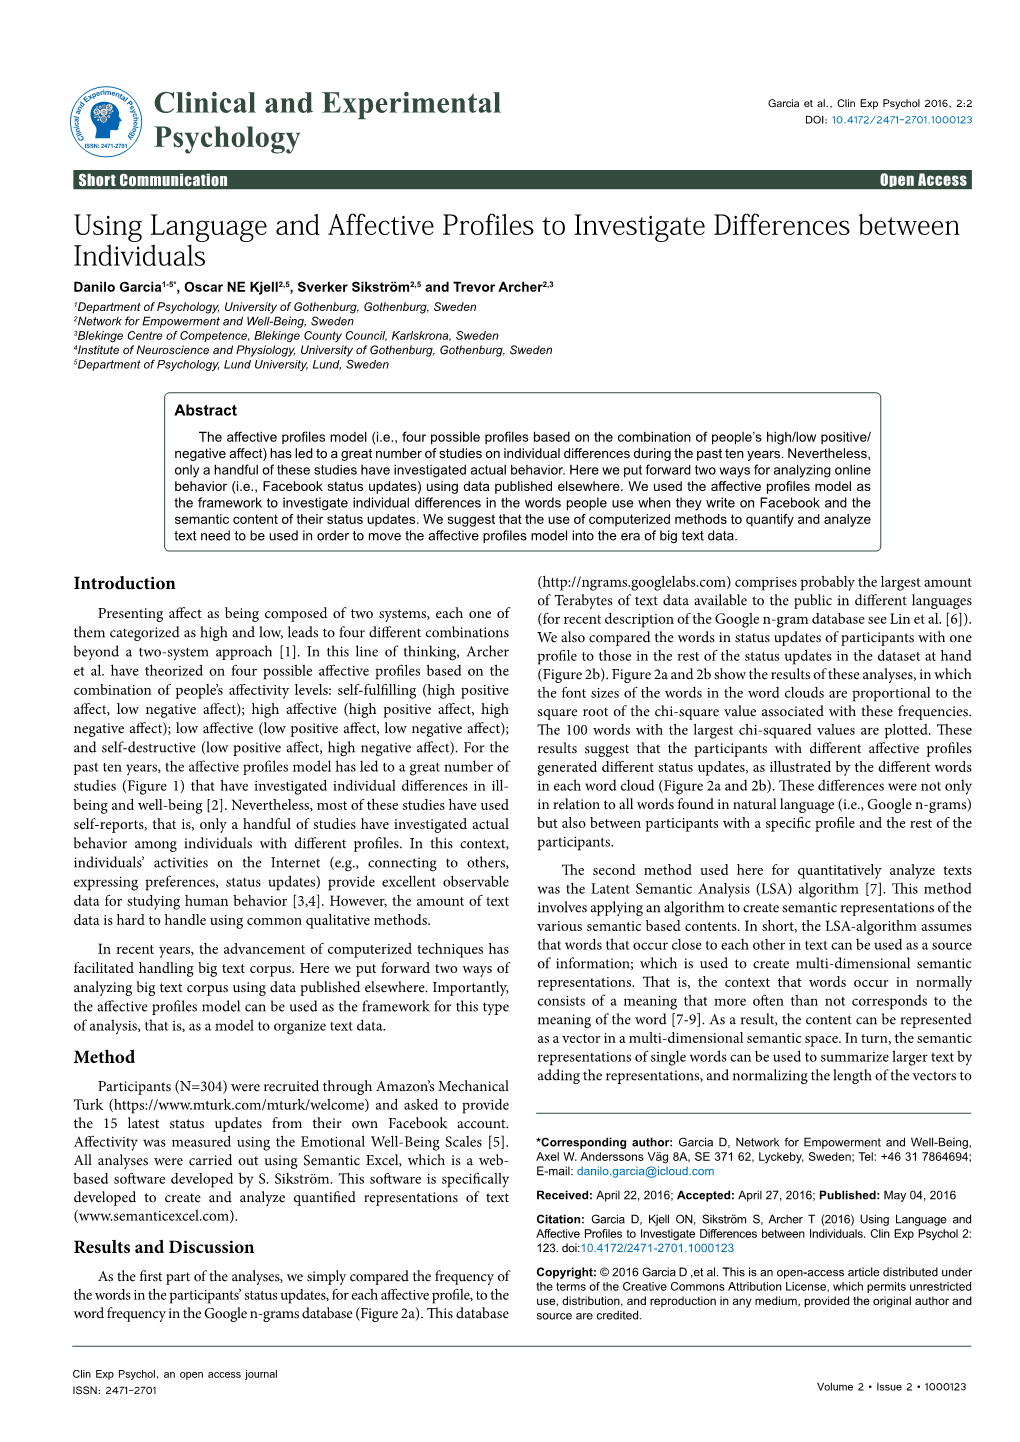 Using Language and Affective Profiles to Investigate Differences Between